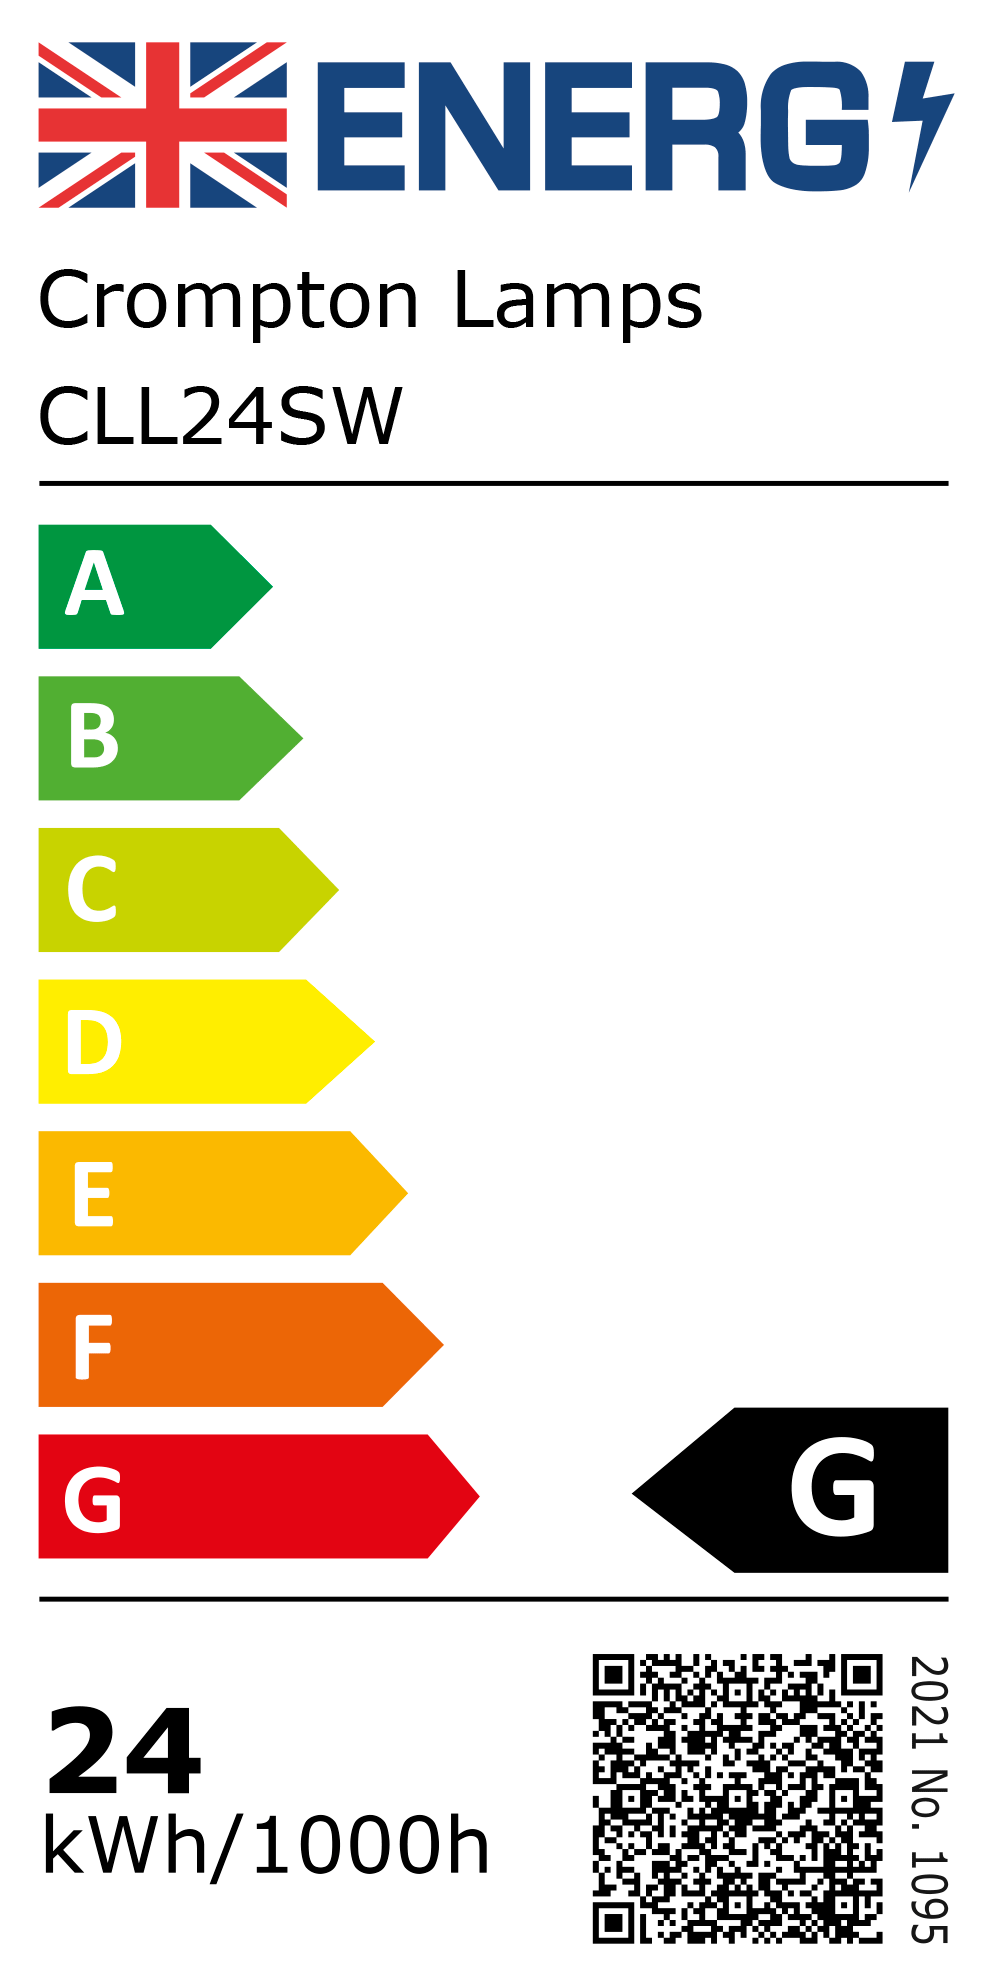 New 2021 Energy Rating Label: Stock Code CLL24SW